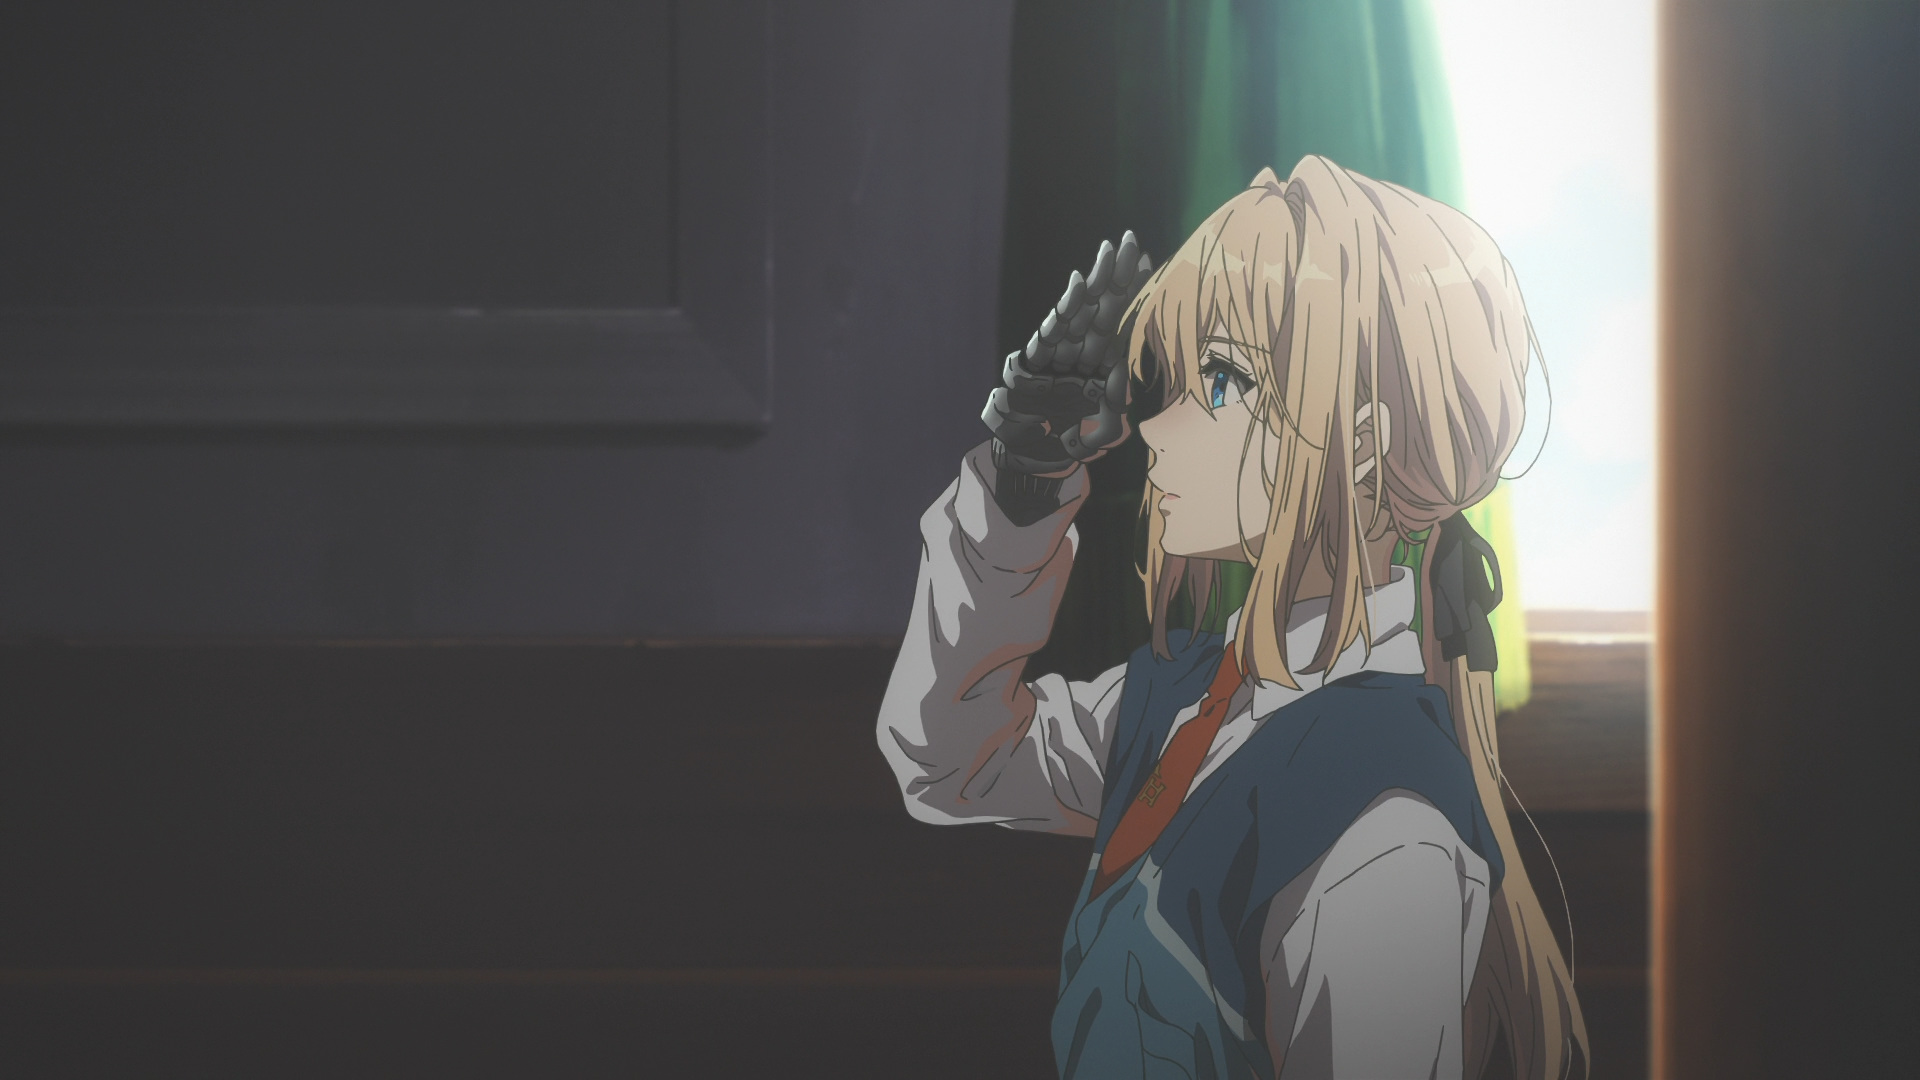 It hasn’t been long, but one can never have too many Violet Evergarden revi...